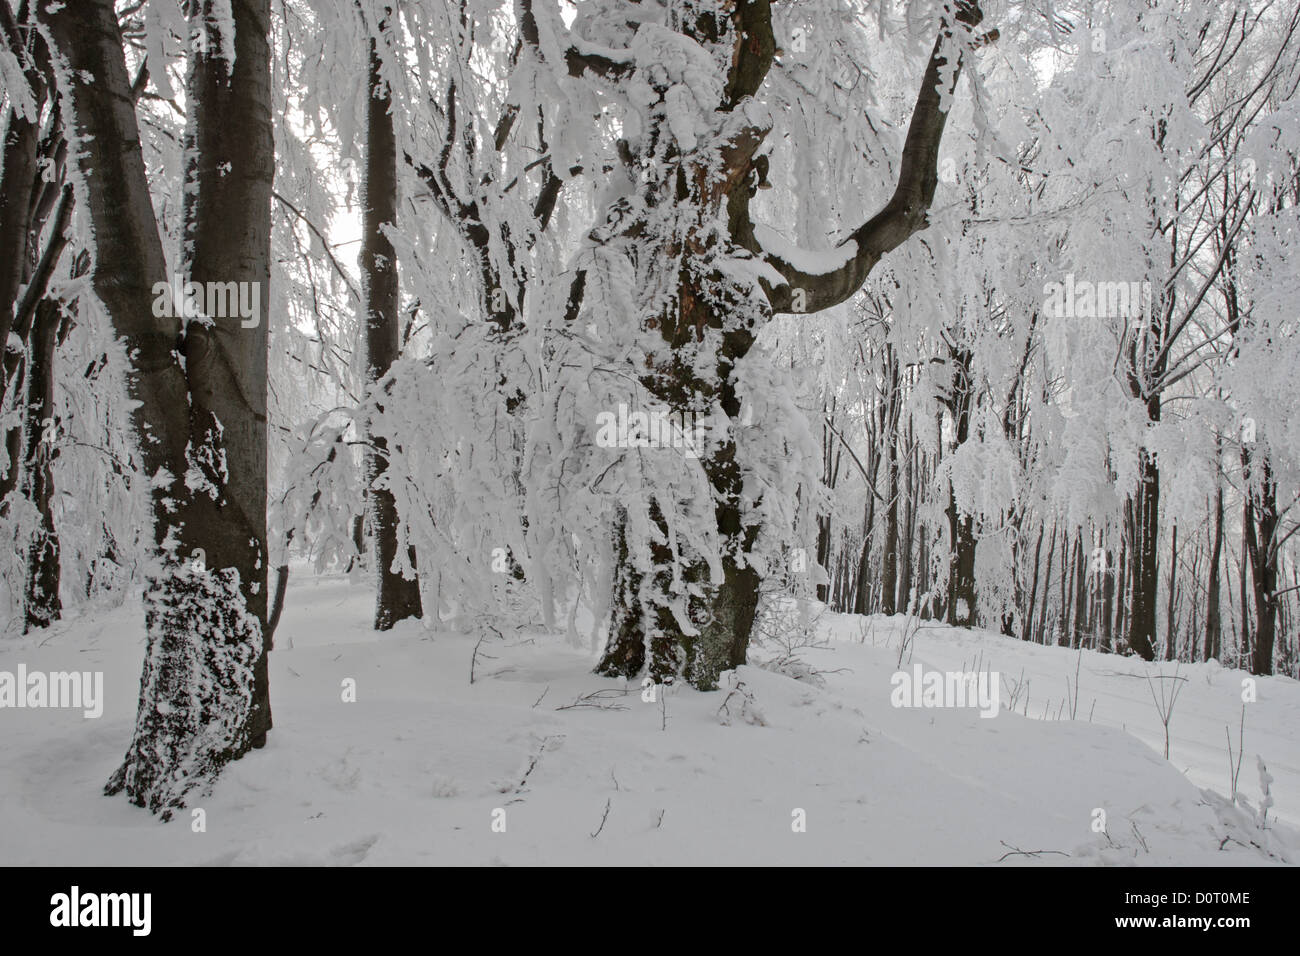 Forest. Winter scene with trees in snow. Central Balkan National Park. Bulgaria Stock Photo